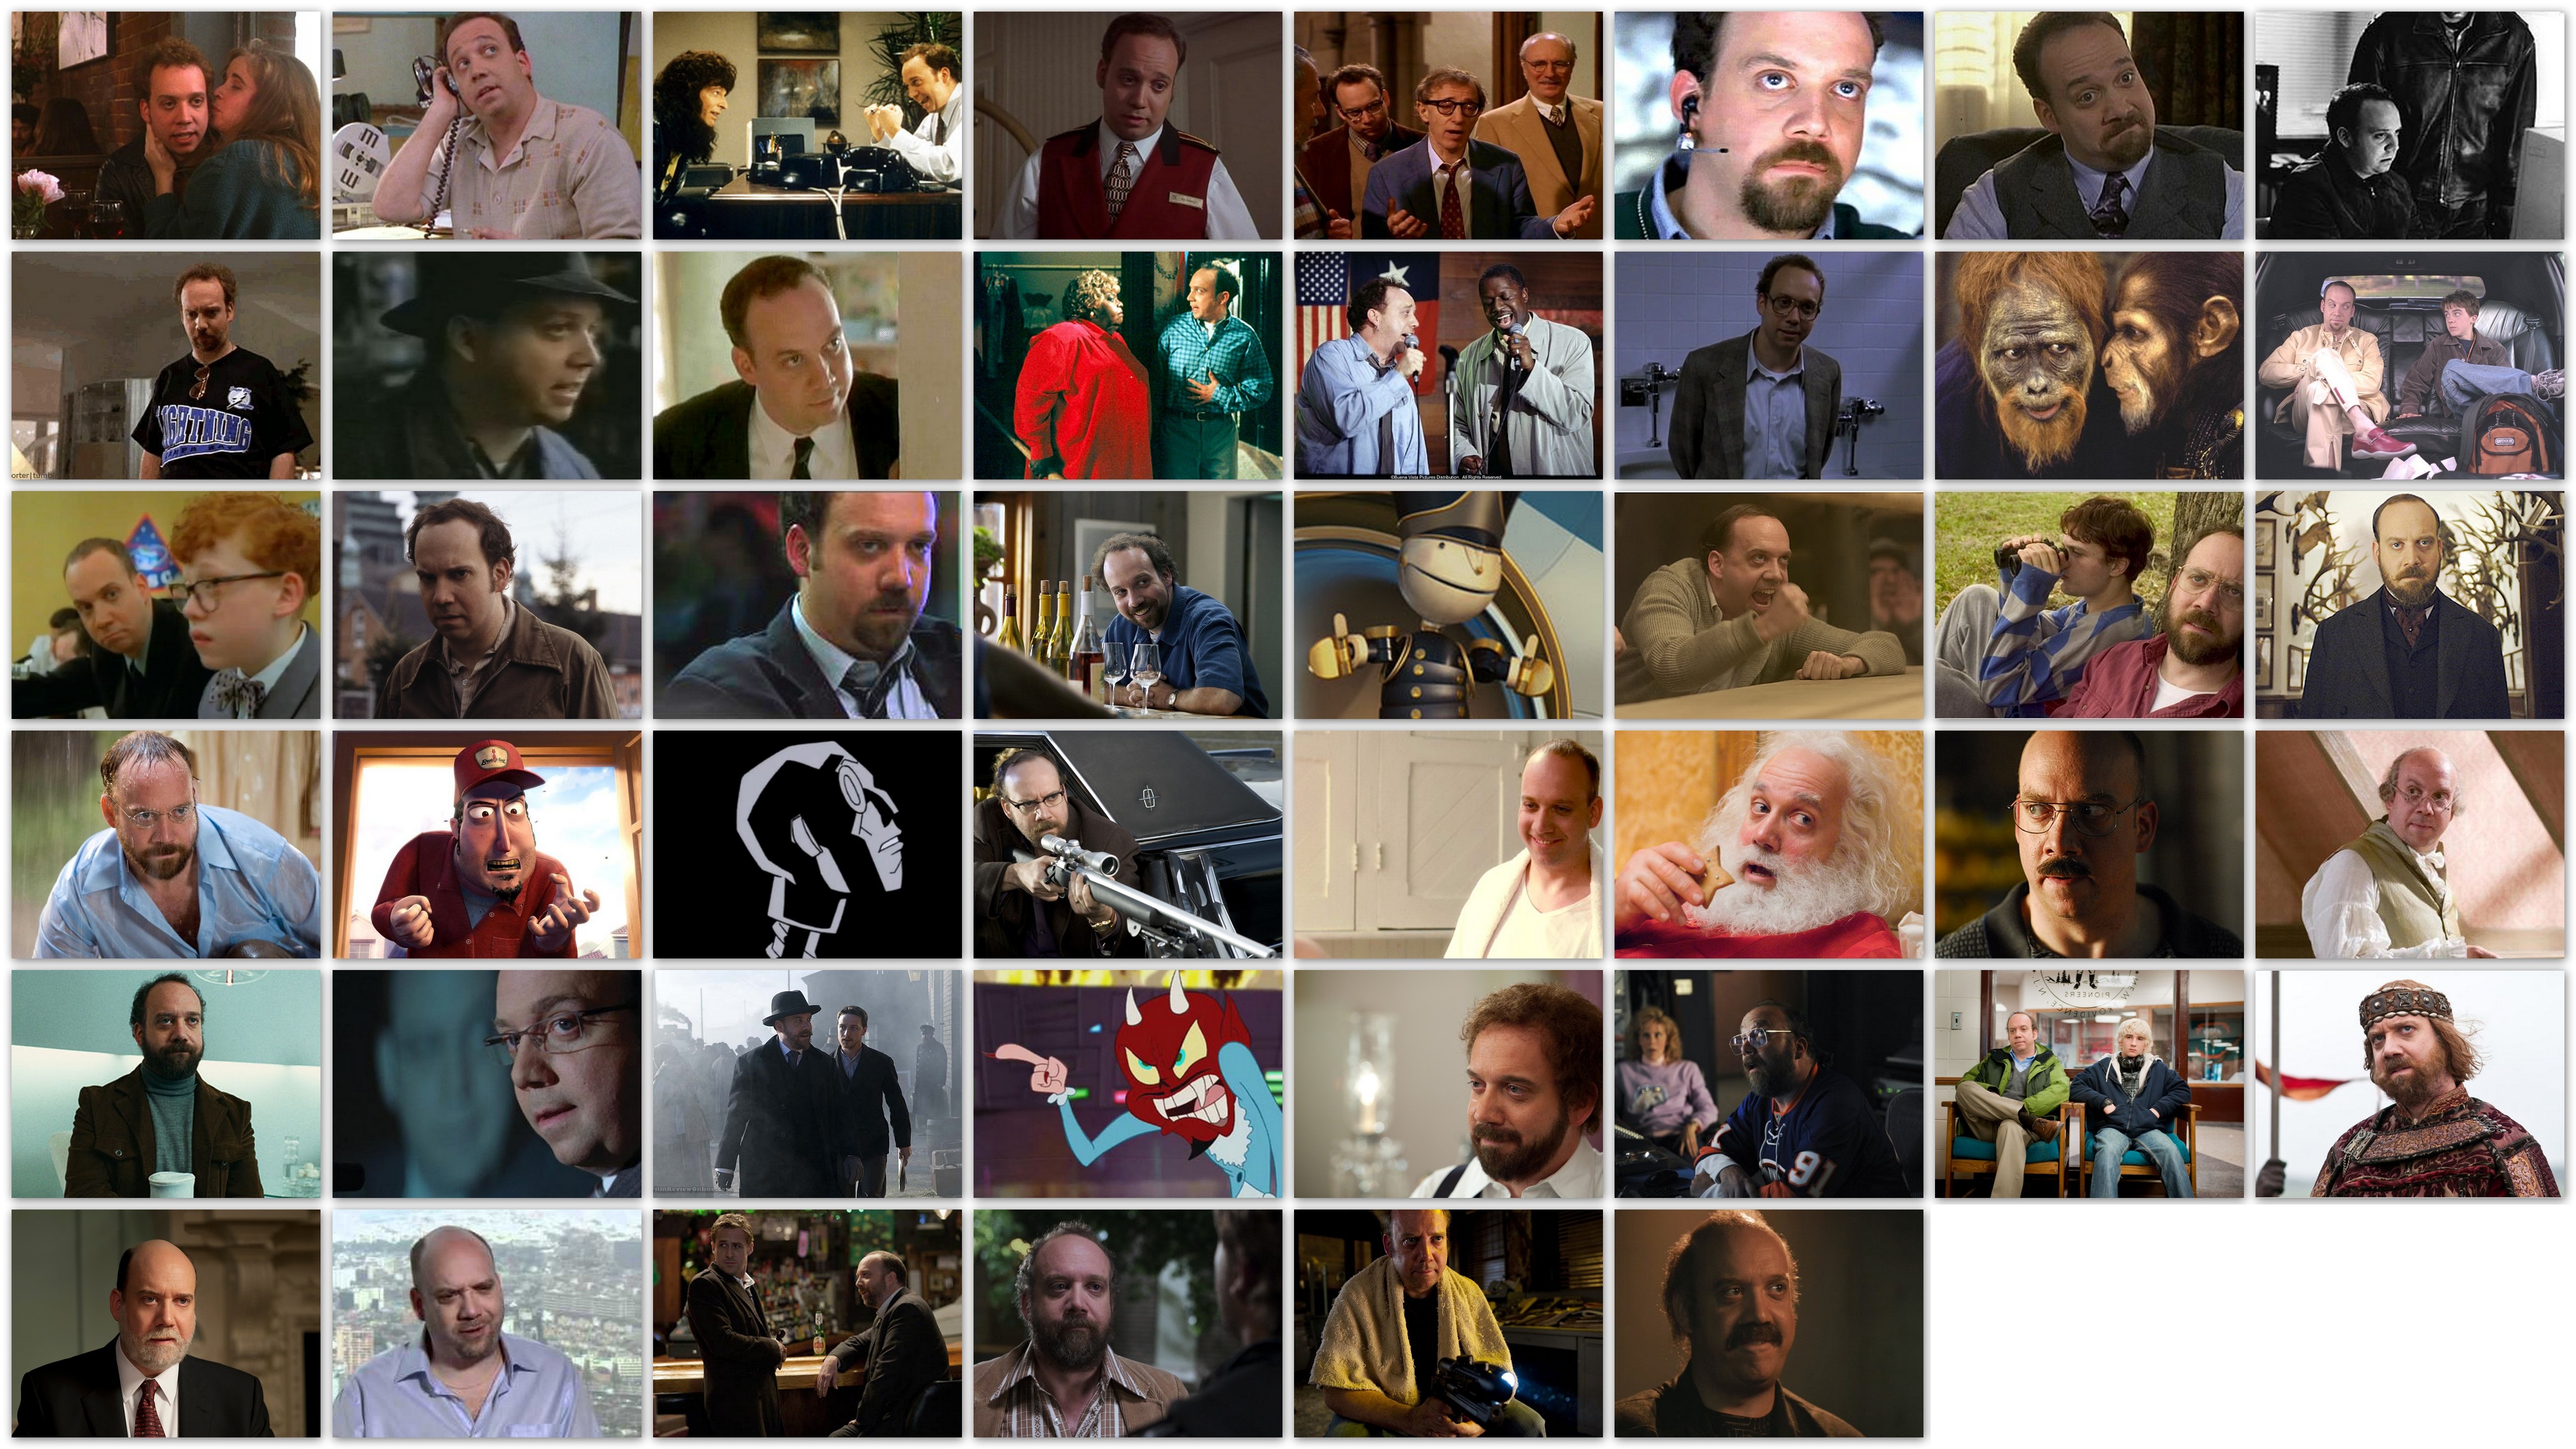 Overview of the roles of actor Paul Giammatti in his career in movies